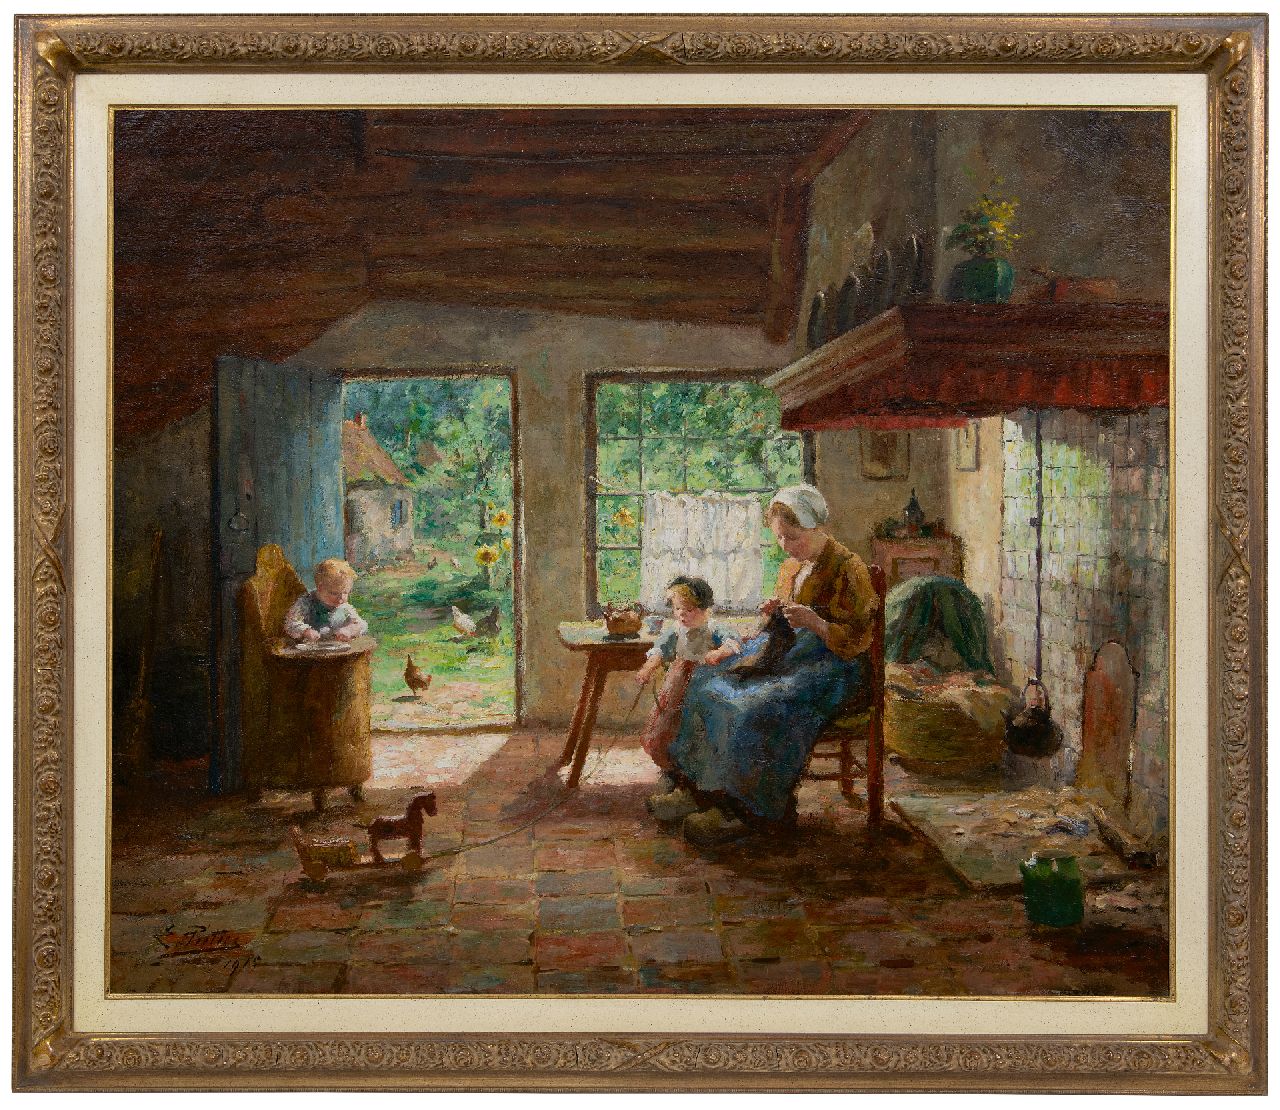 Pieters E.  | Evert Pieters | Paintings offered for sale | Mother and children in a sunny farmhouse interior, oil on canvas 78.5 x 92.4 cm, signed l.l. and dated 1915